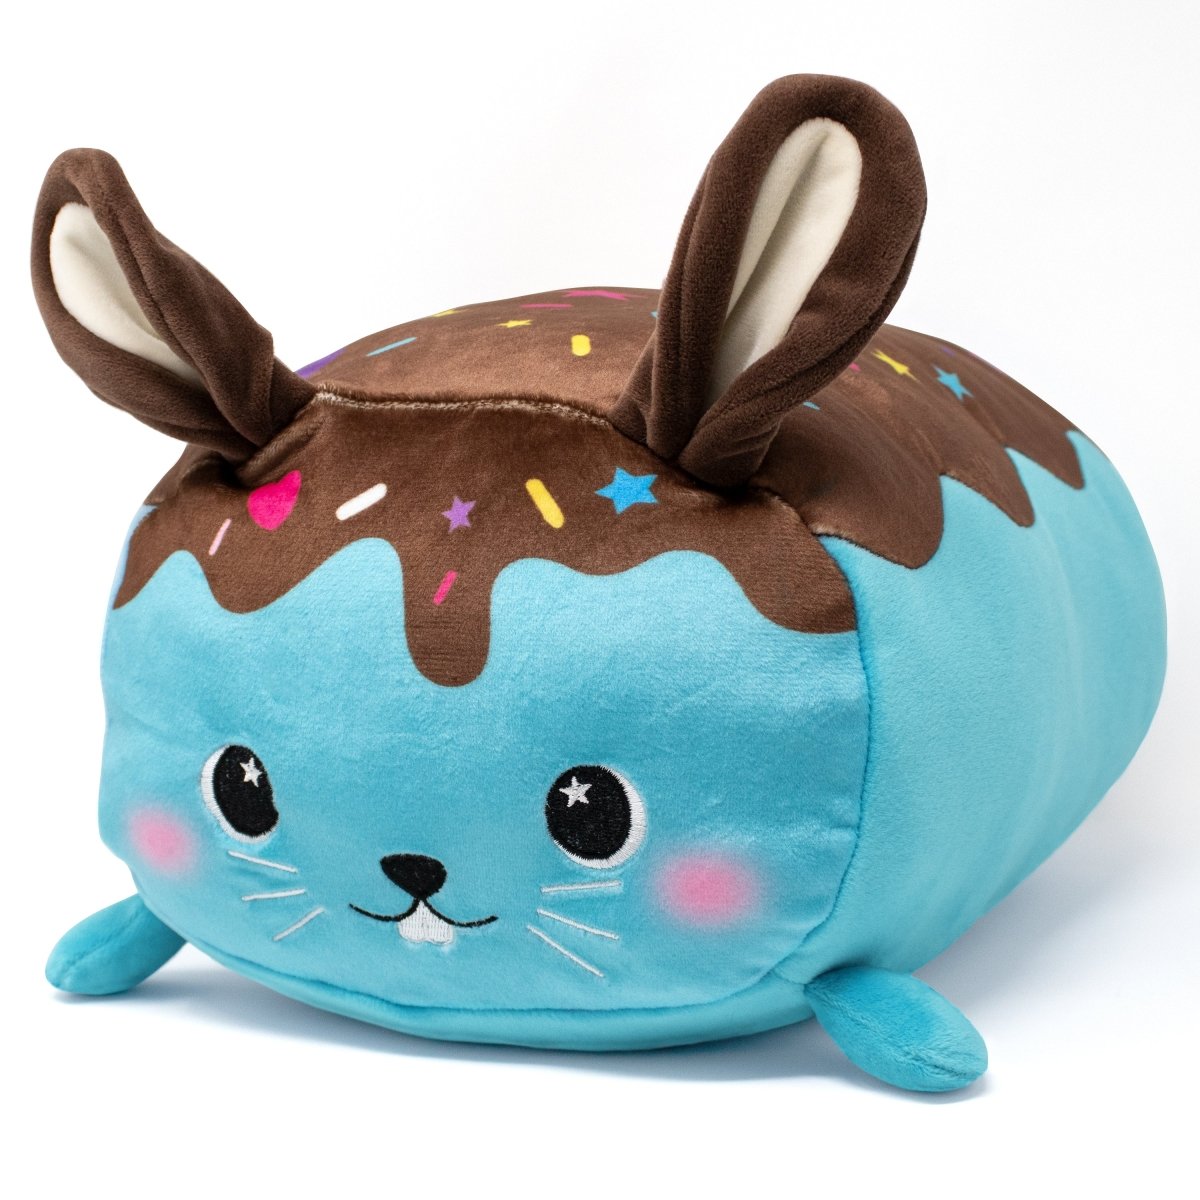 Blue Bunny Stuffed Animal with Chocolate and Sprinkles